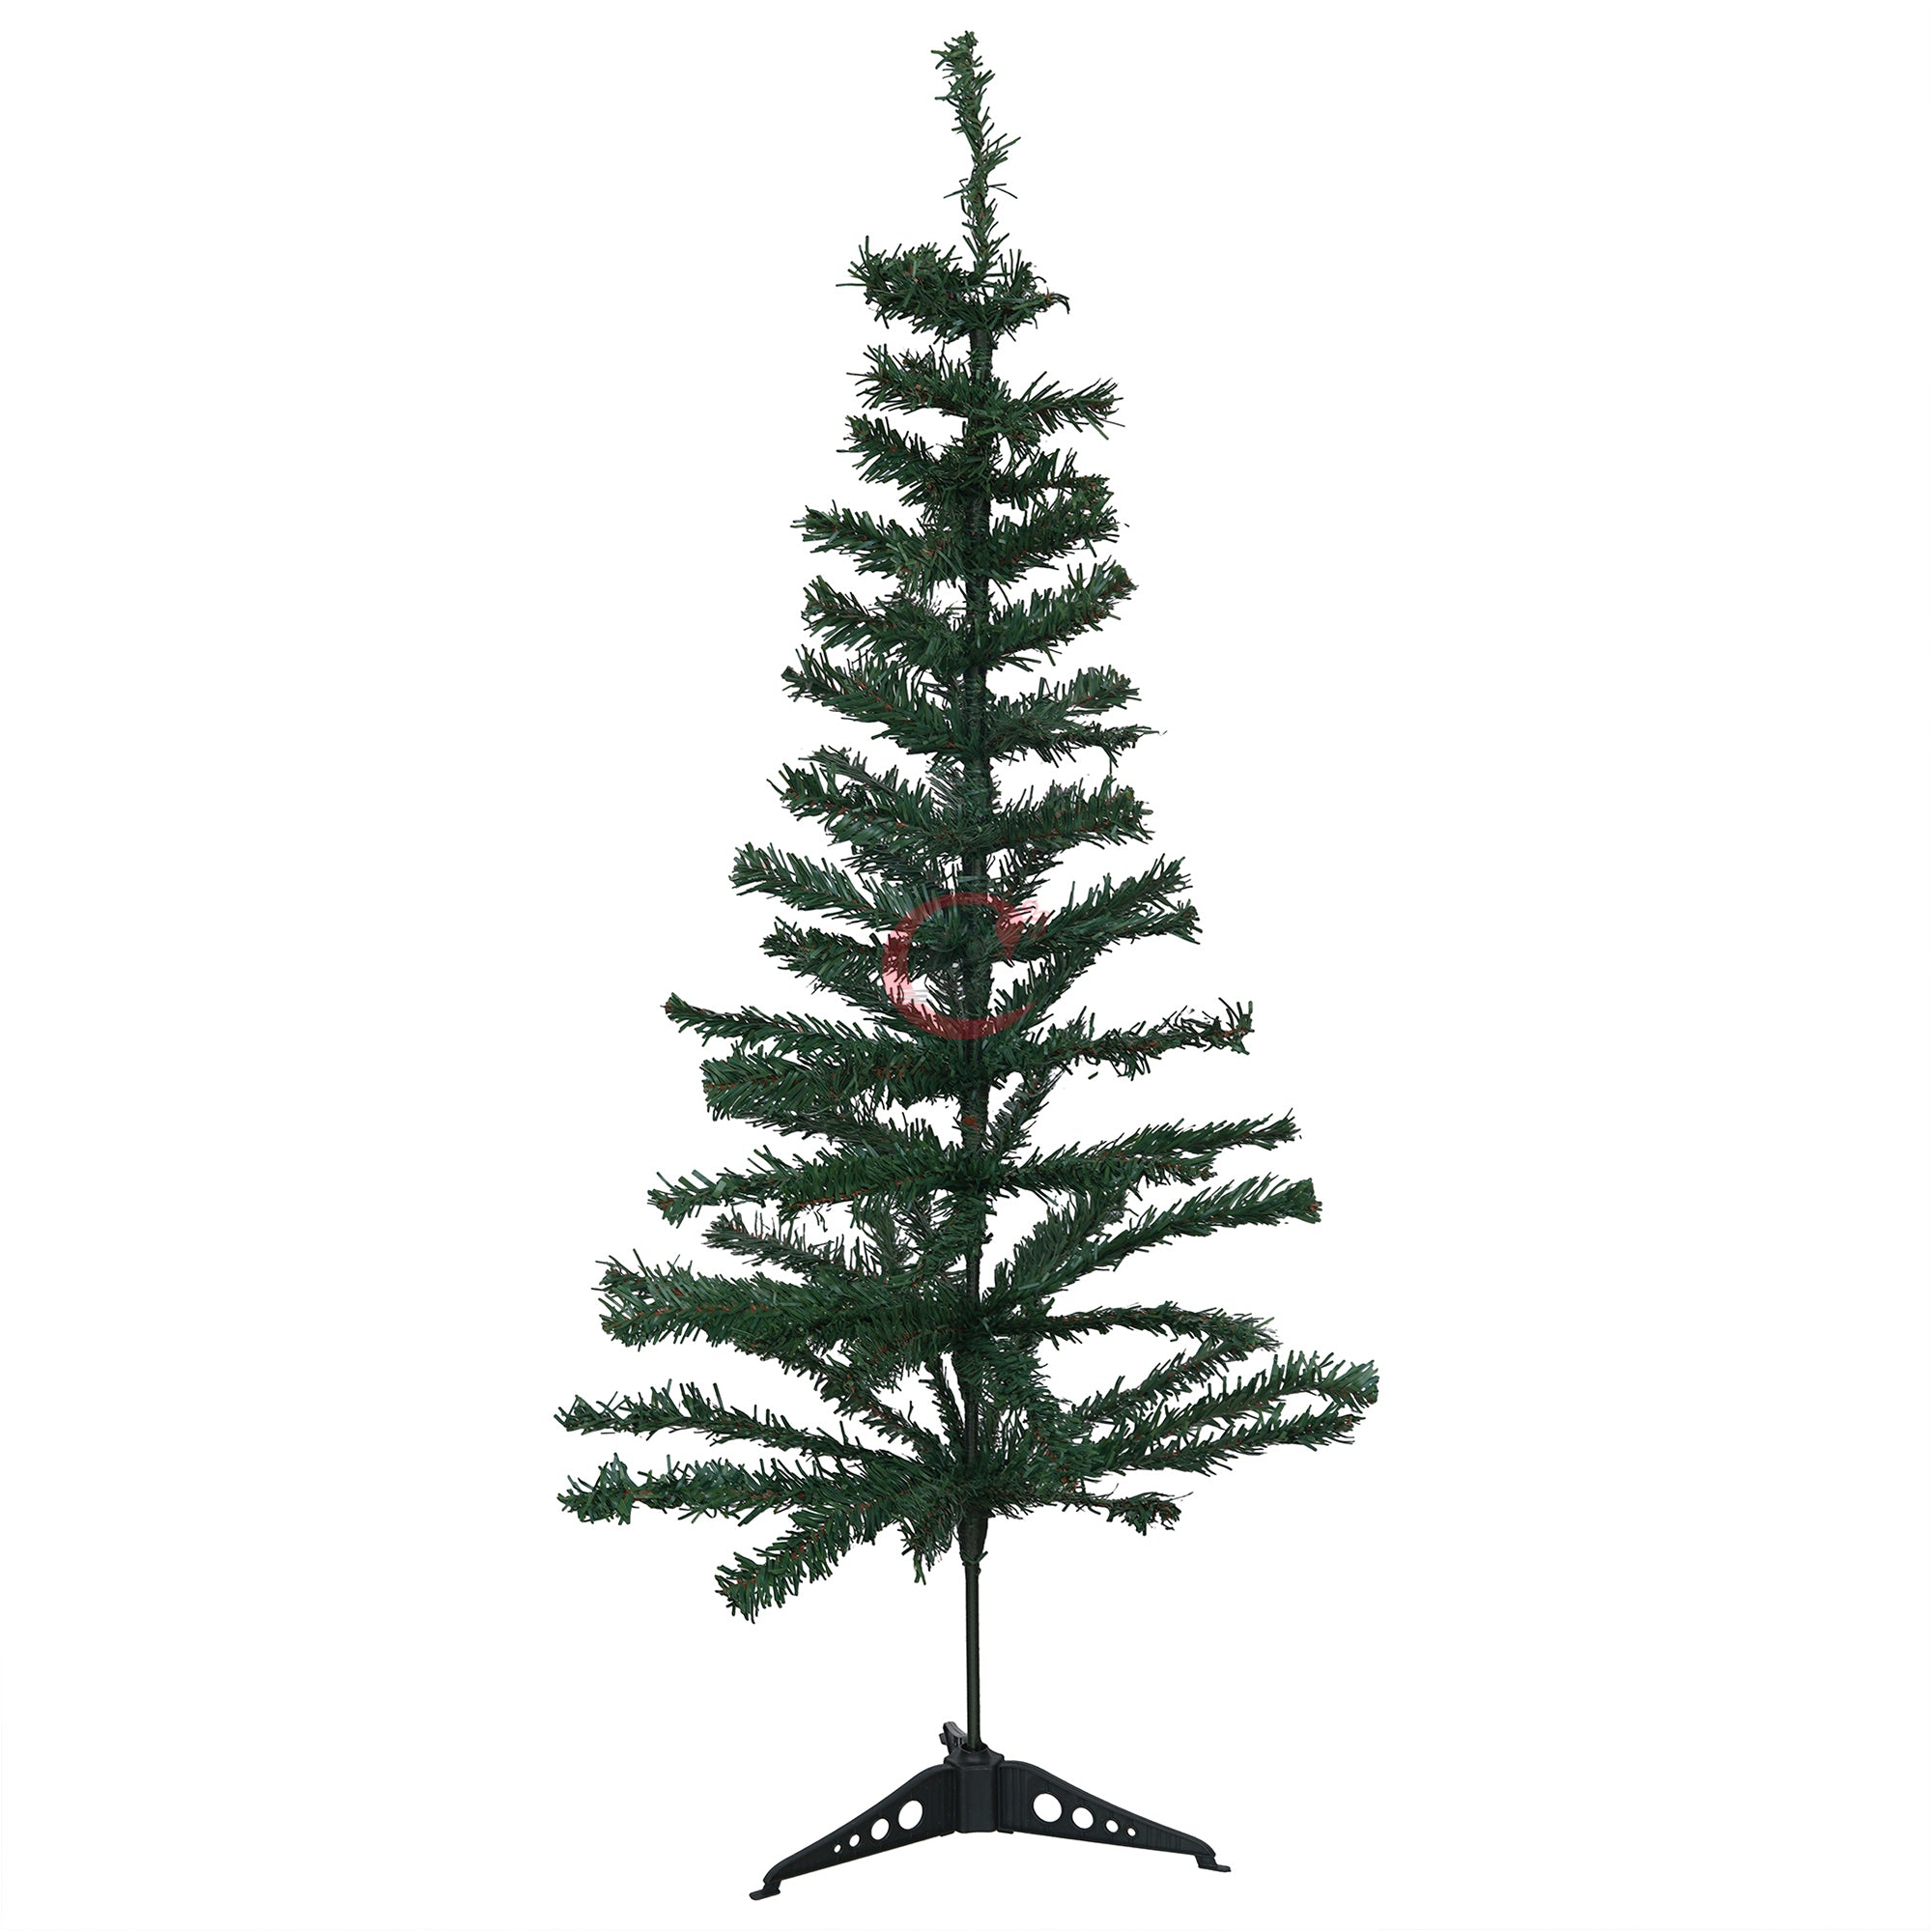 eCraftIndia 4 Feet Green Artificial Christmas Tree Xmas Pine Tree with Metal Stand - Xmas Tree for Indoor, Outdoor, Home, Living Room, Office, Church Decor - Merry Christmas Decoration Item… 2